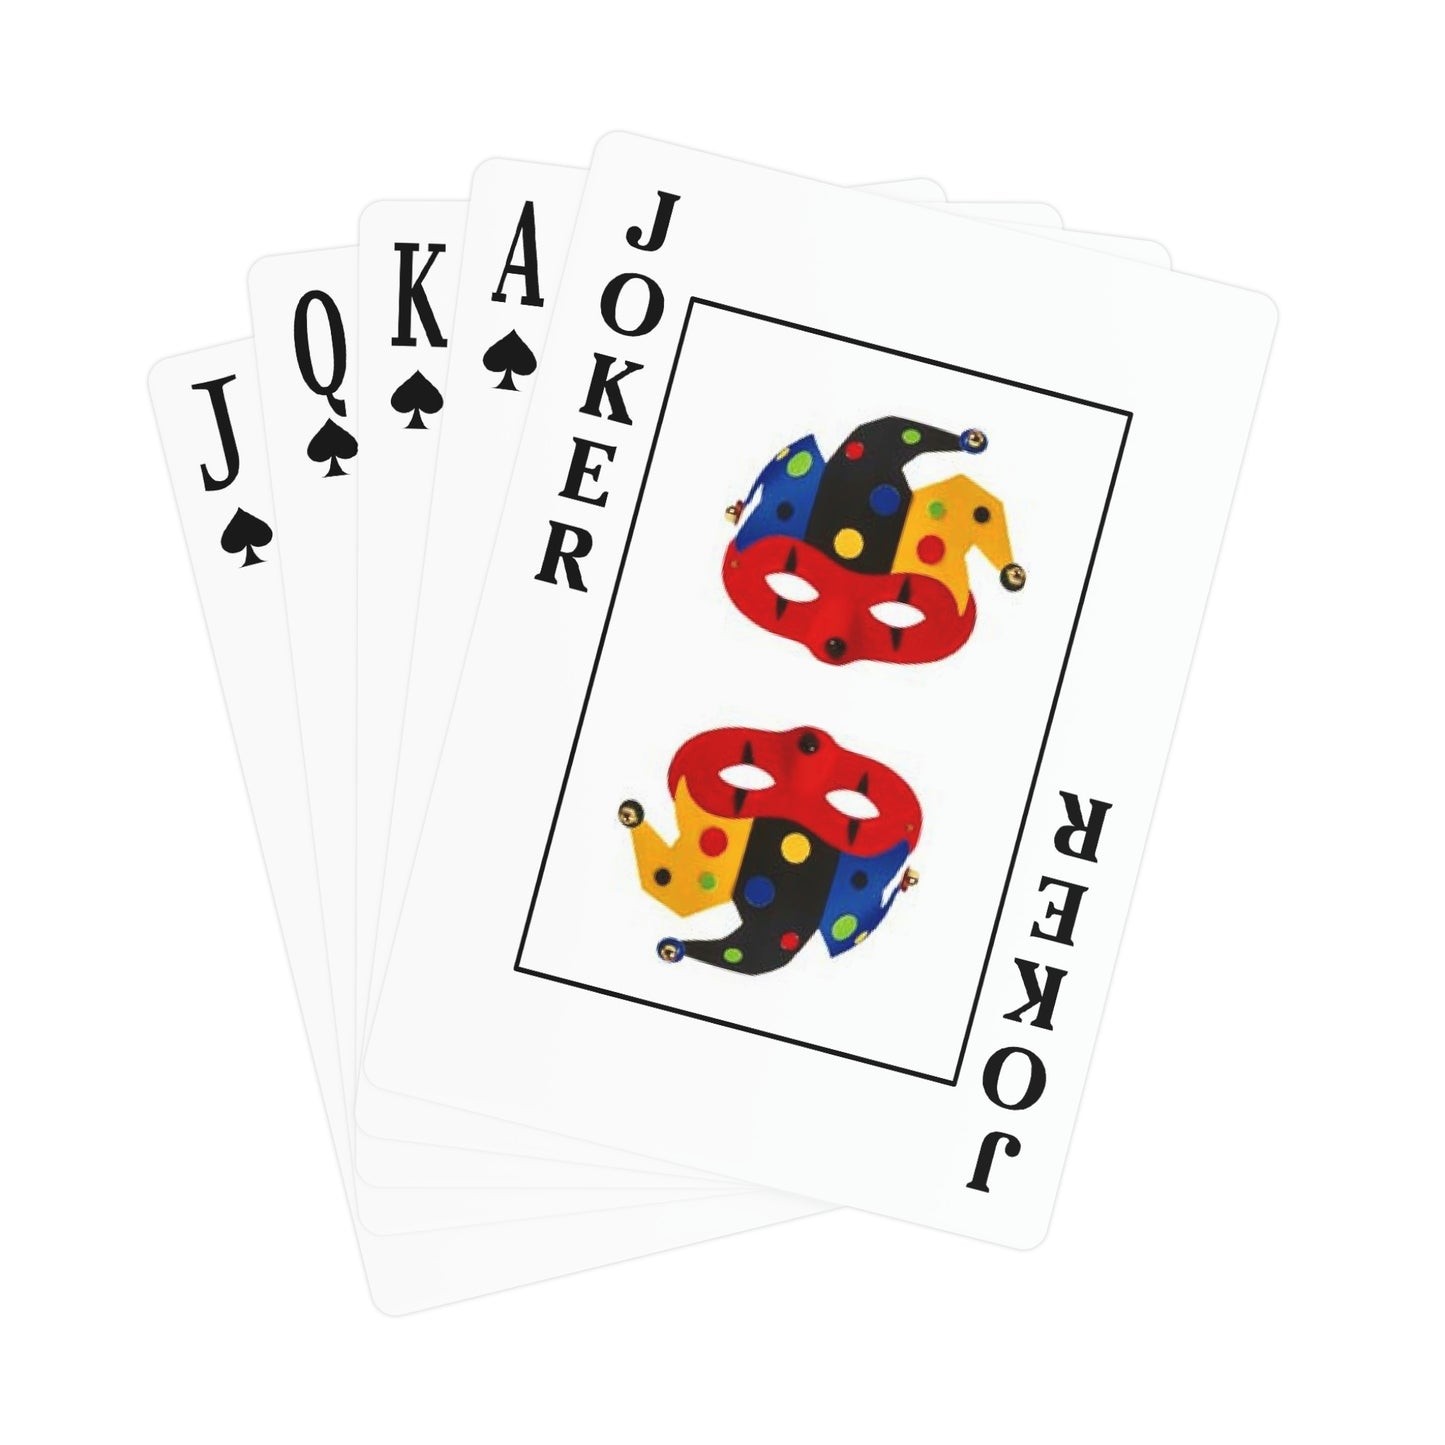 Mind Games - Playing Cards